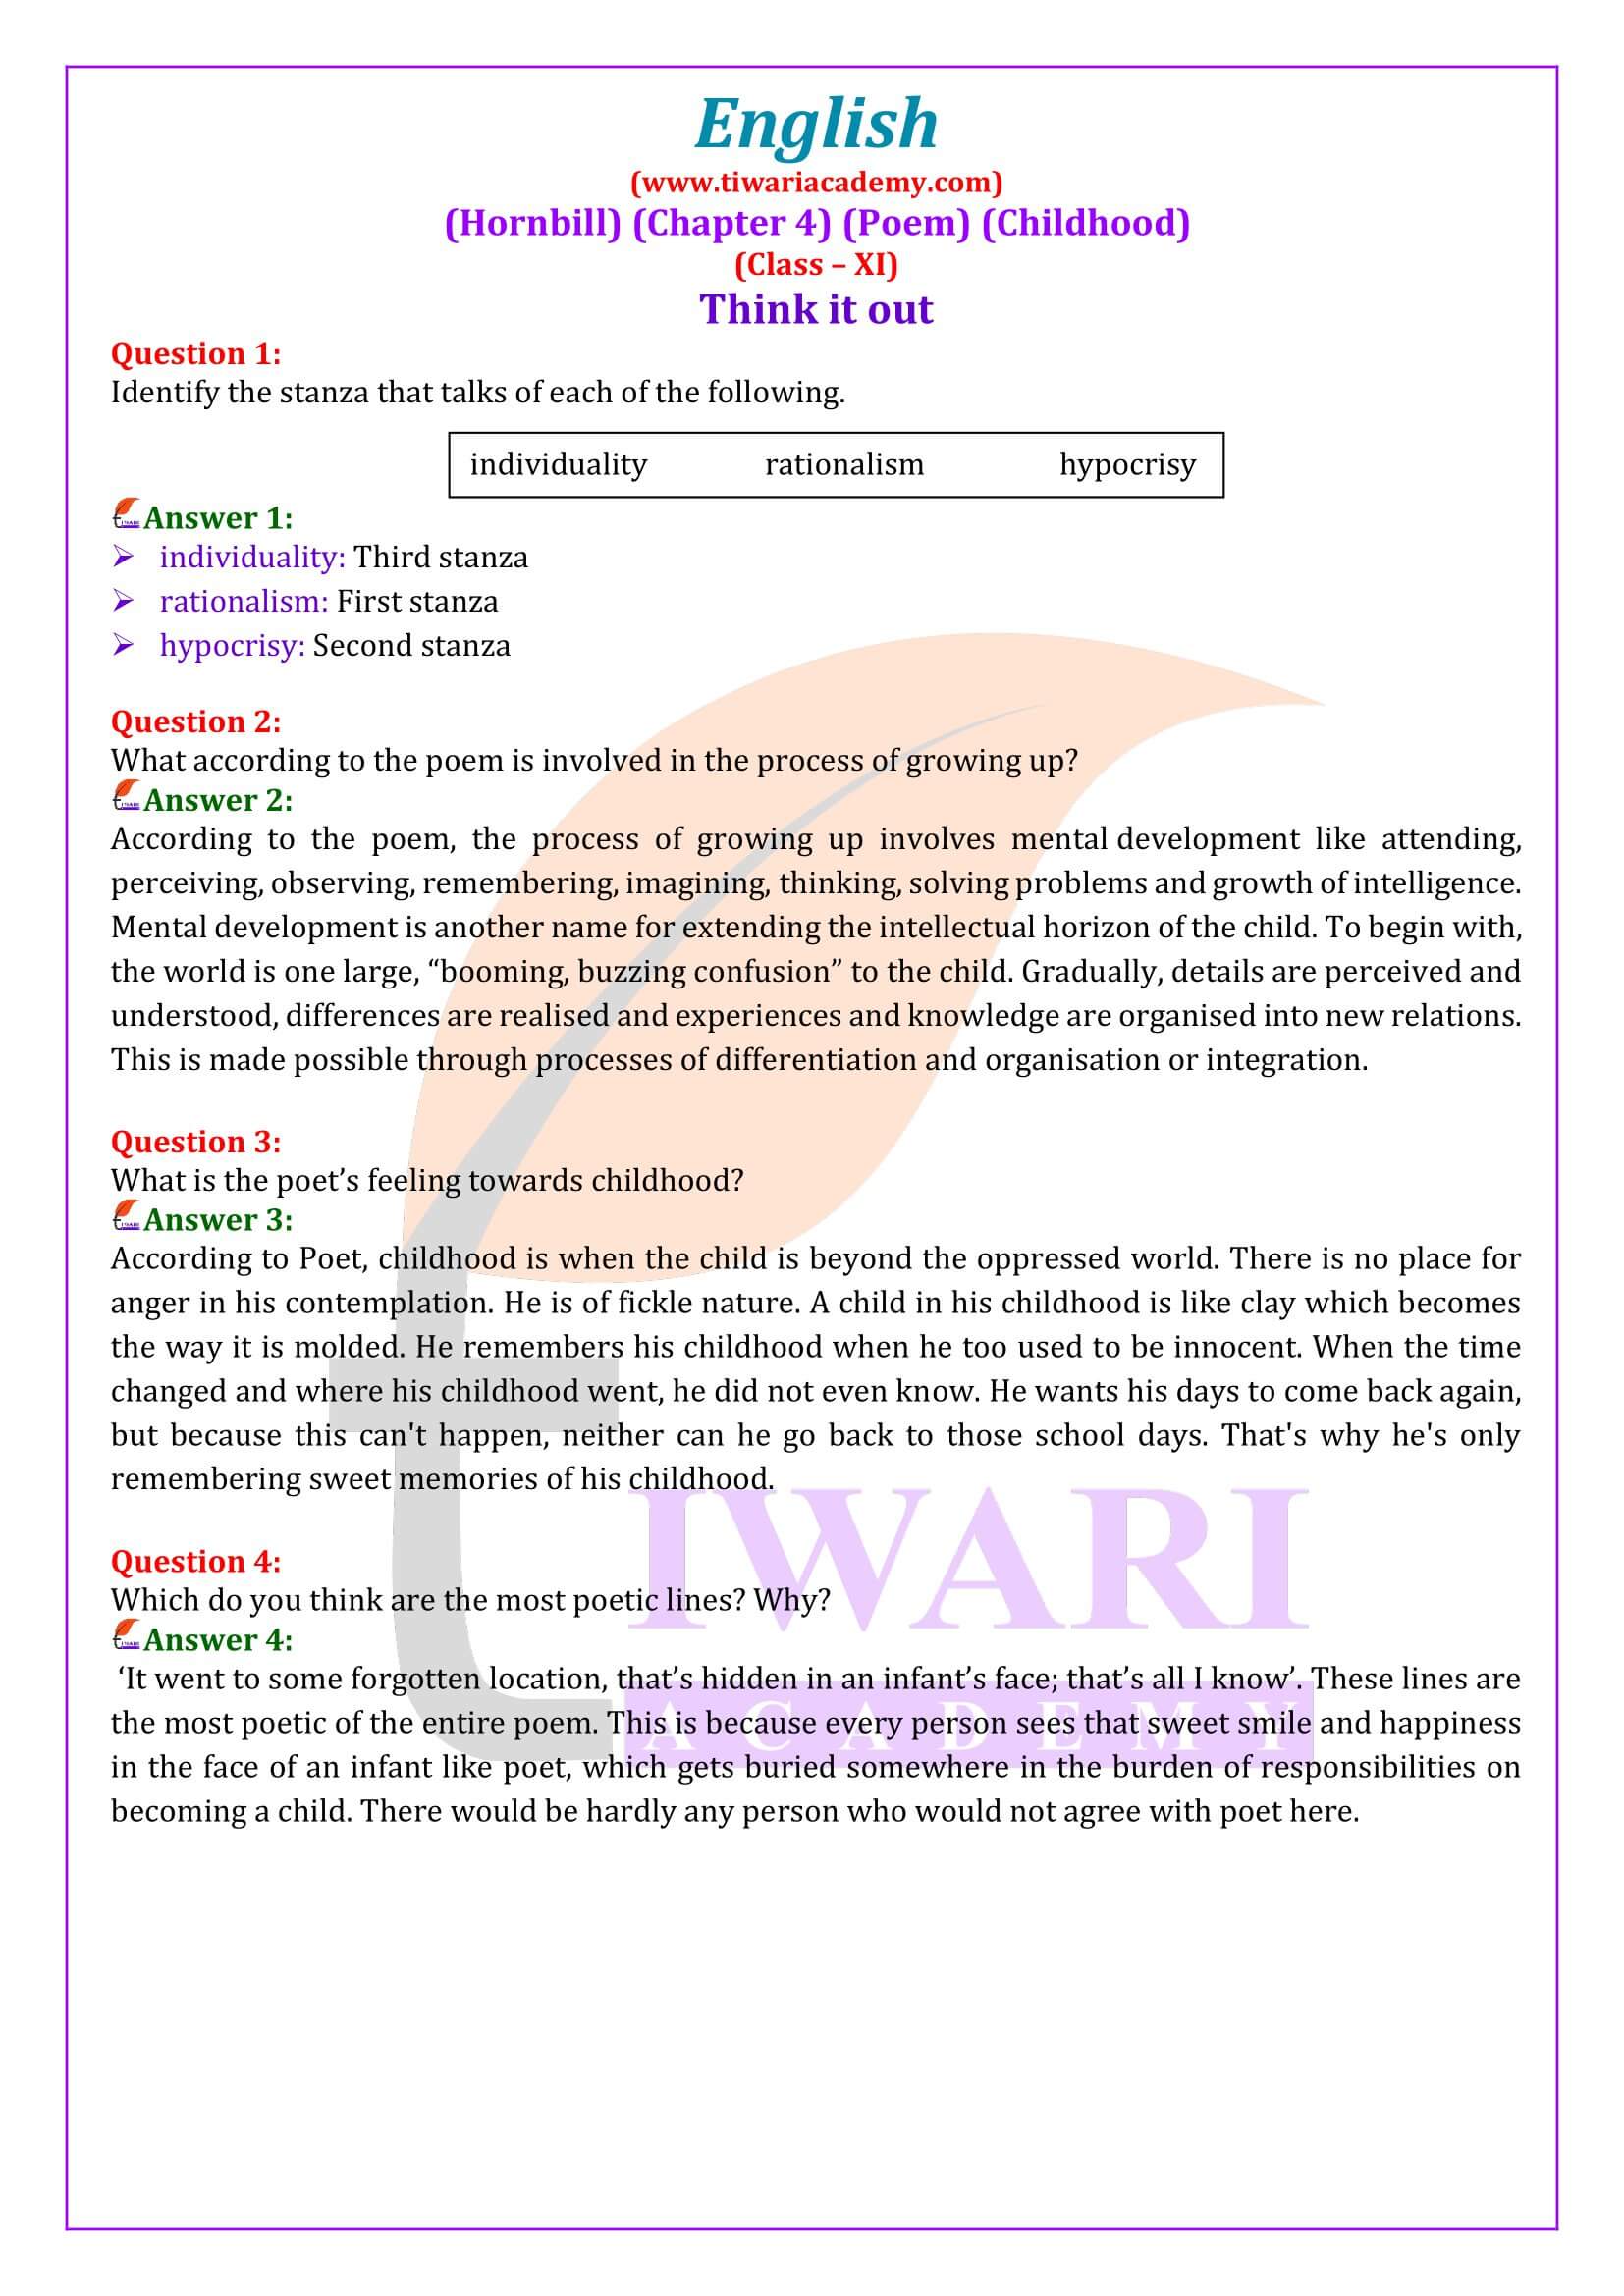 Class 11 English Hornbill Chapter 4 Answers